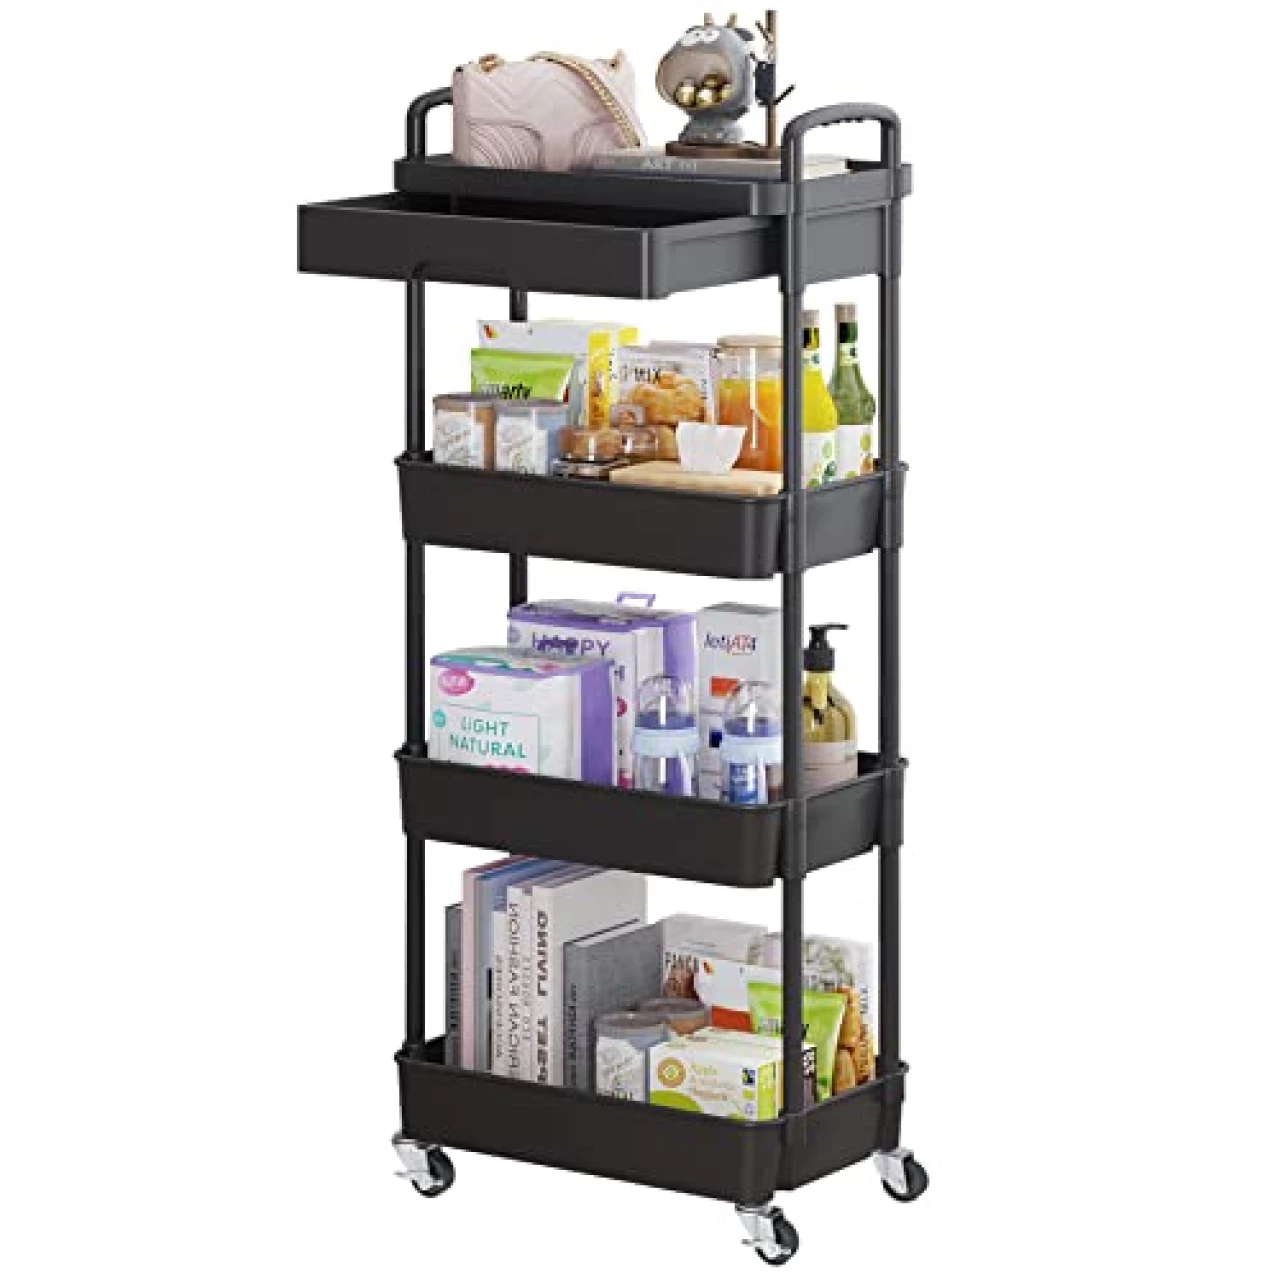 Calmootey 4-Tier Rolling Utility Cart with Drawer, Multifunctional Storage Organizer, Black